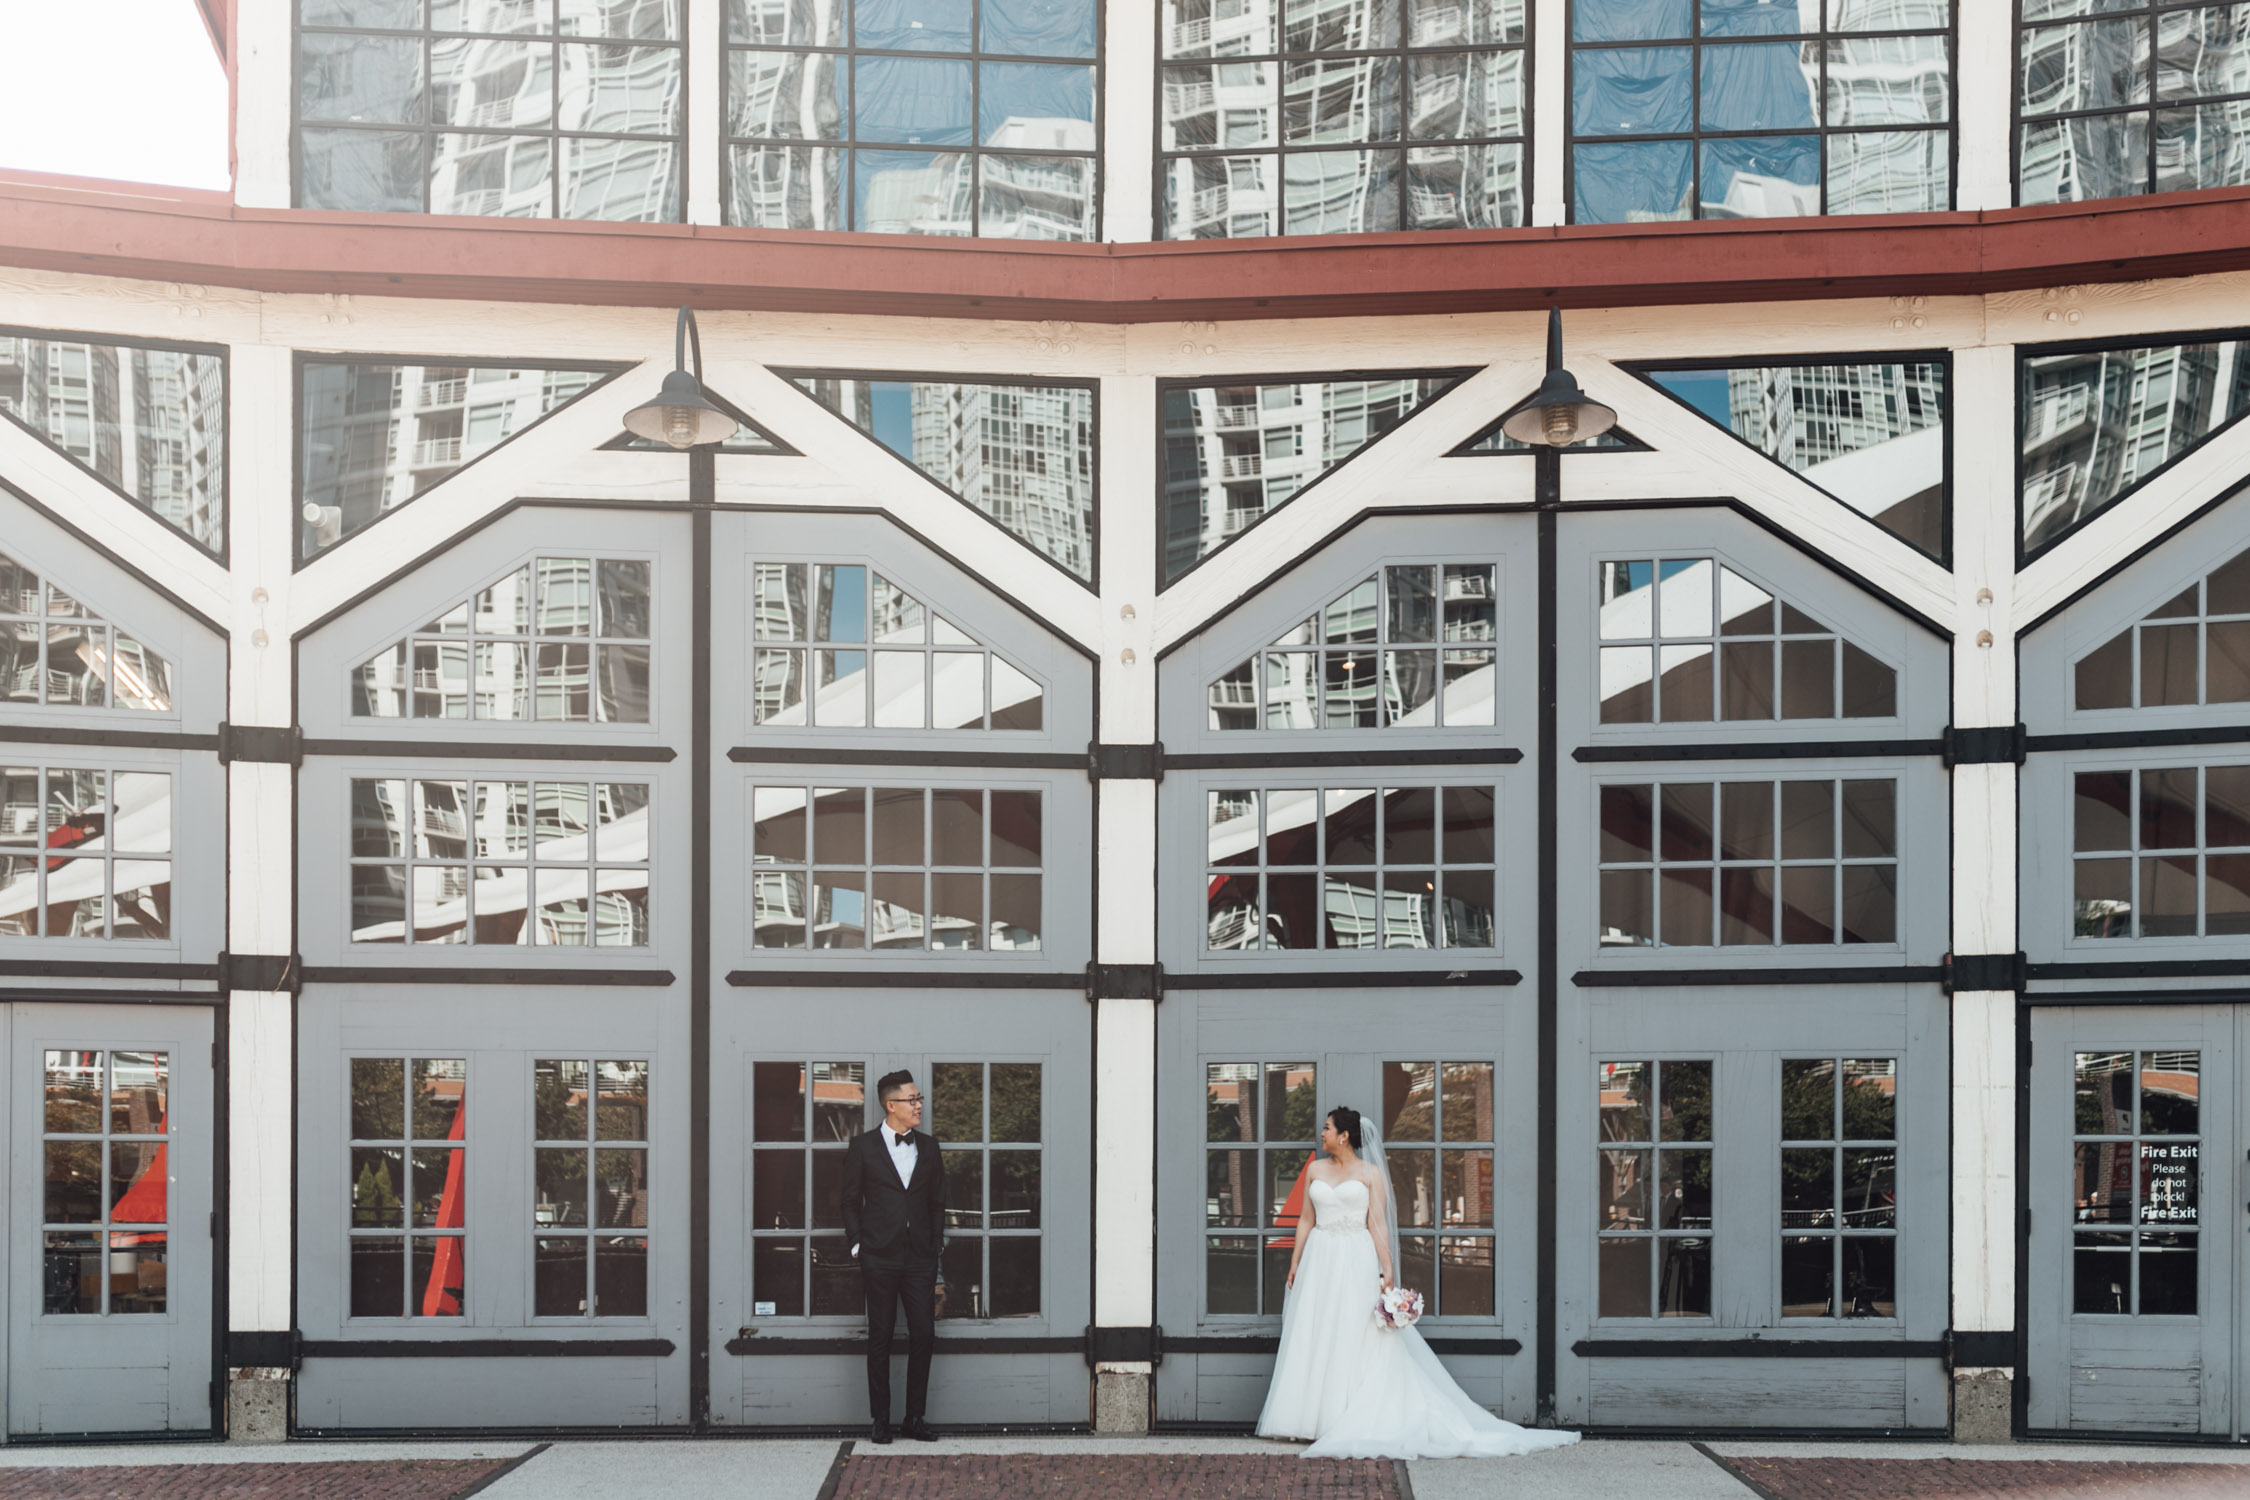 Brix & Mortar Wedding in Yaletown, Vancouver BC | Jenny & Kevin